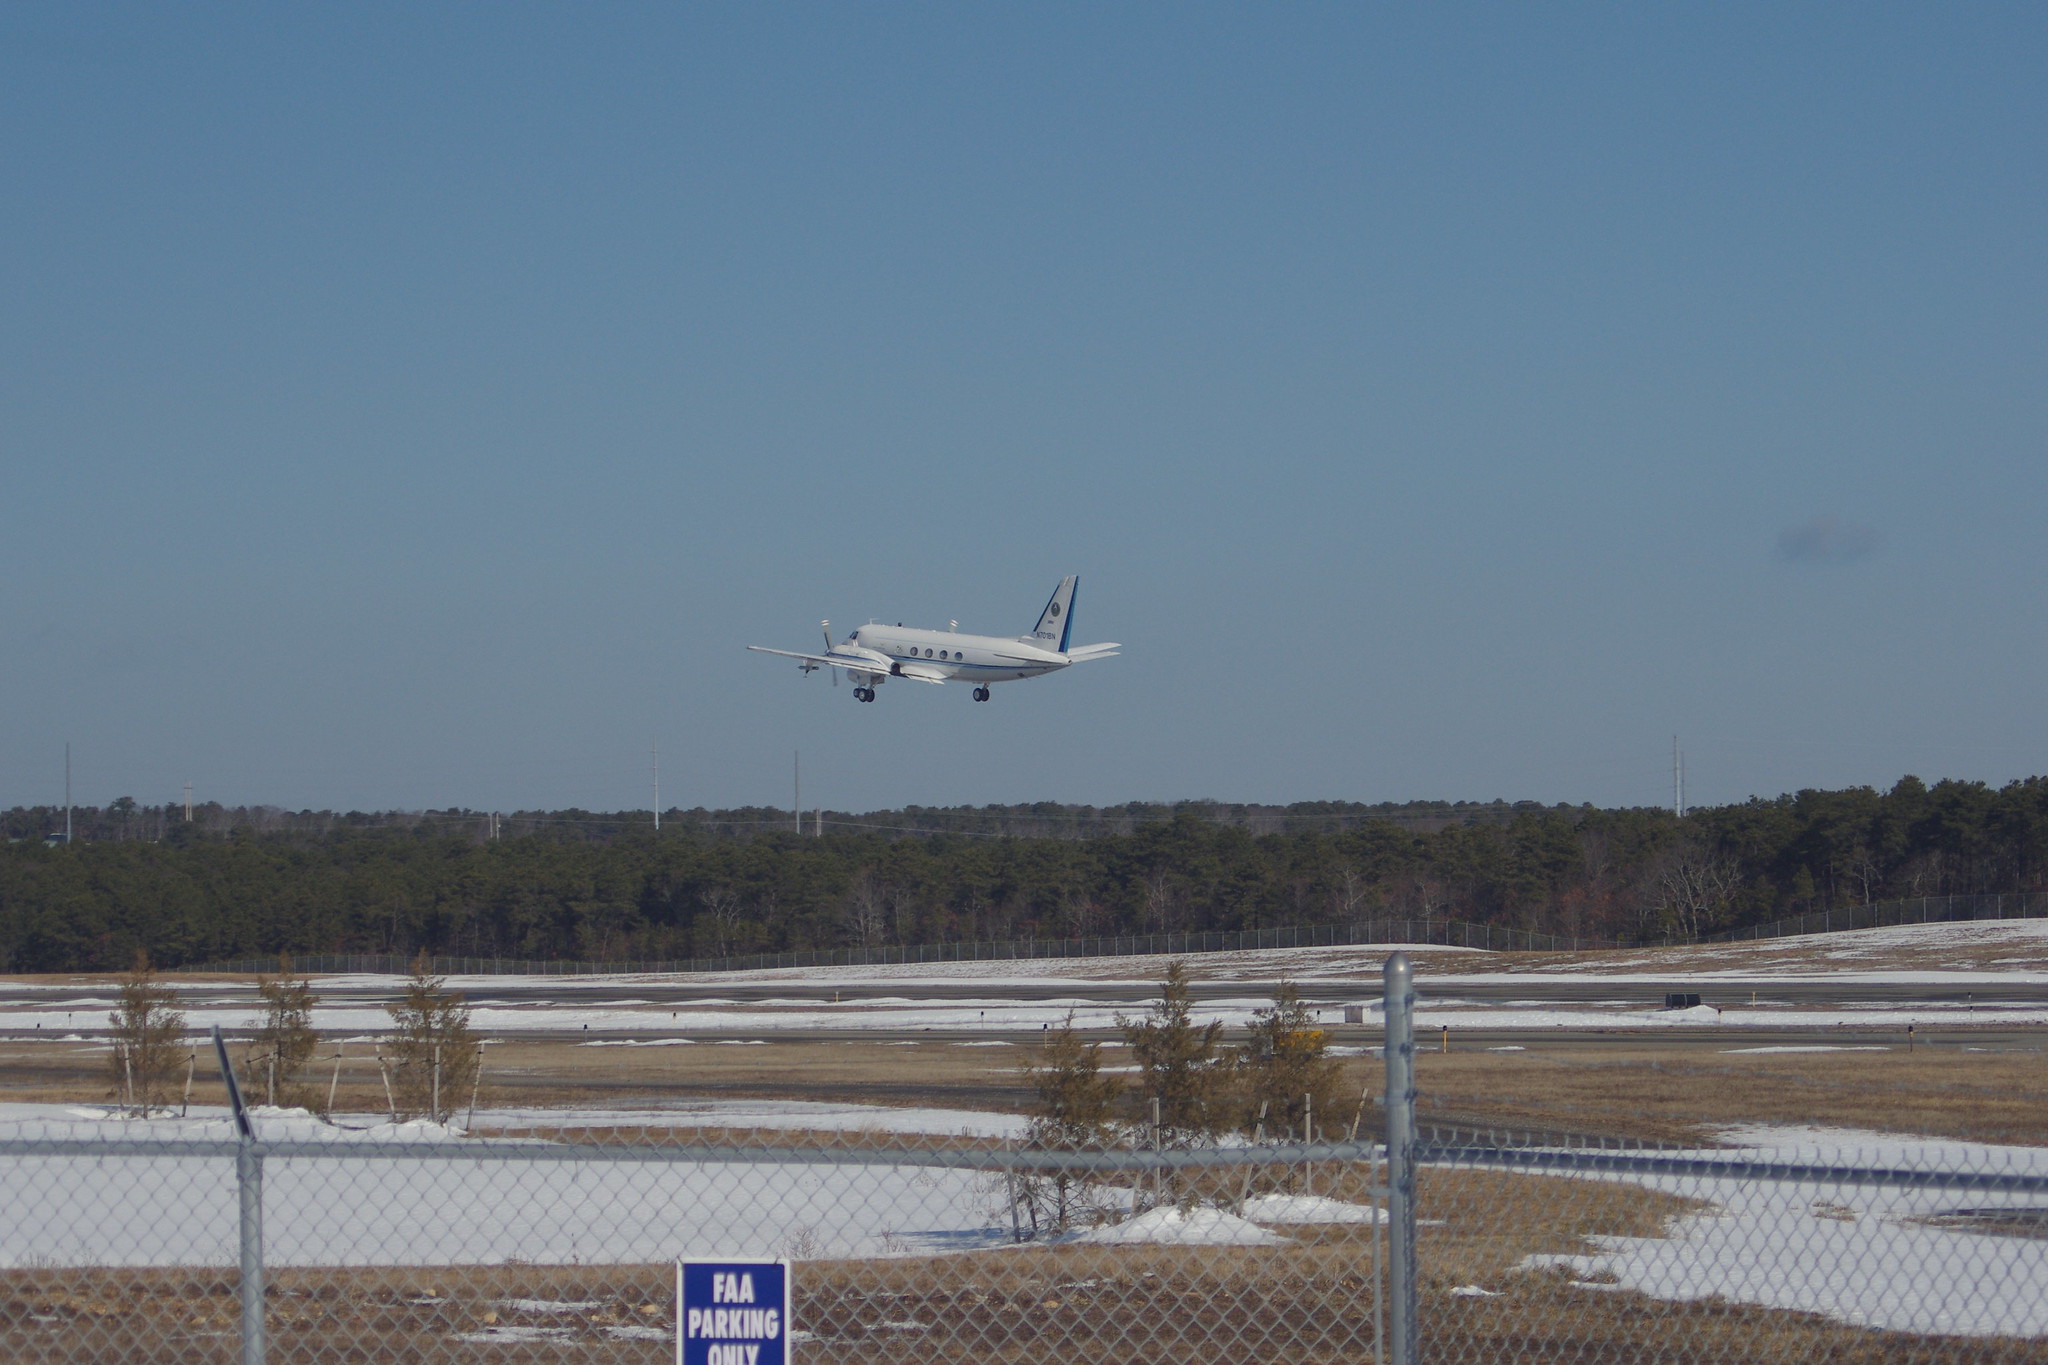 ARM’s Gulfstream-159 (G-1) research aircraft takes off for a TCAP flight from Cape Cod Gateway Airport in Hyannis, Massachusetts, in February 2013.